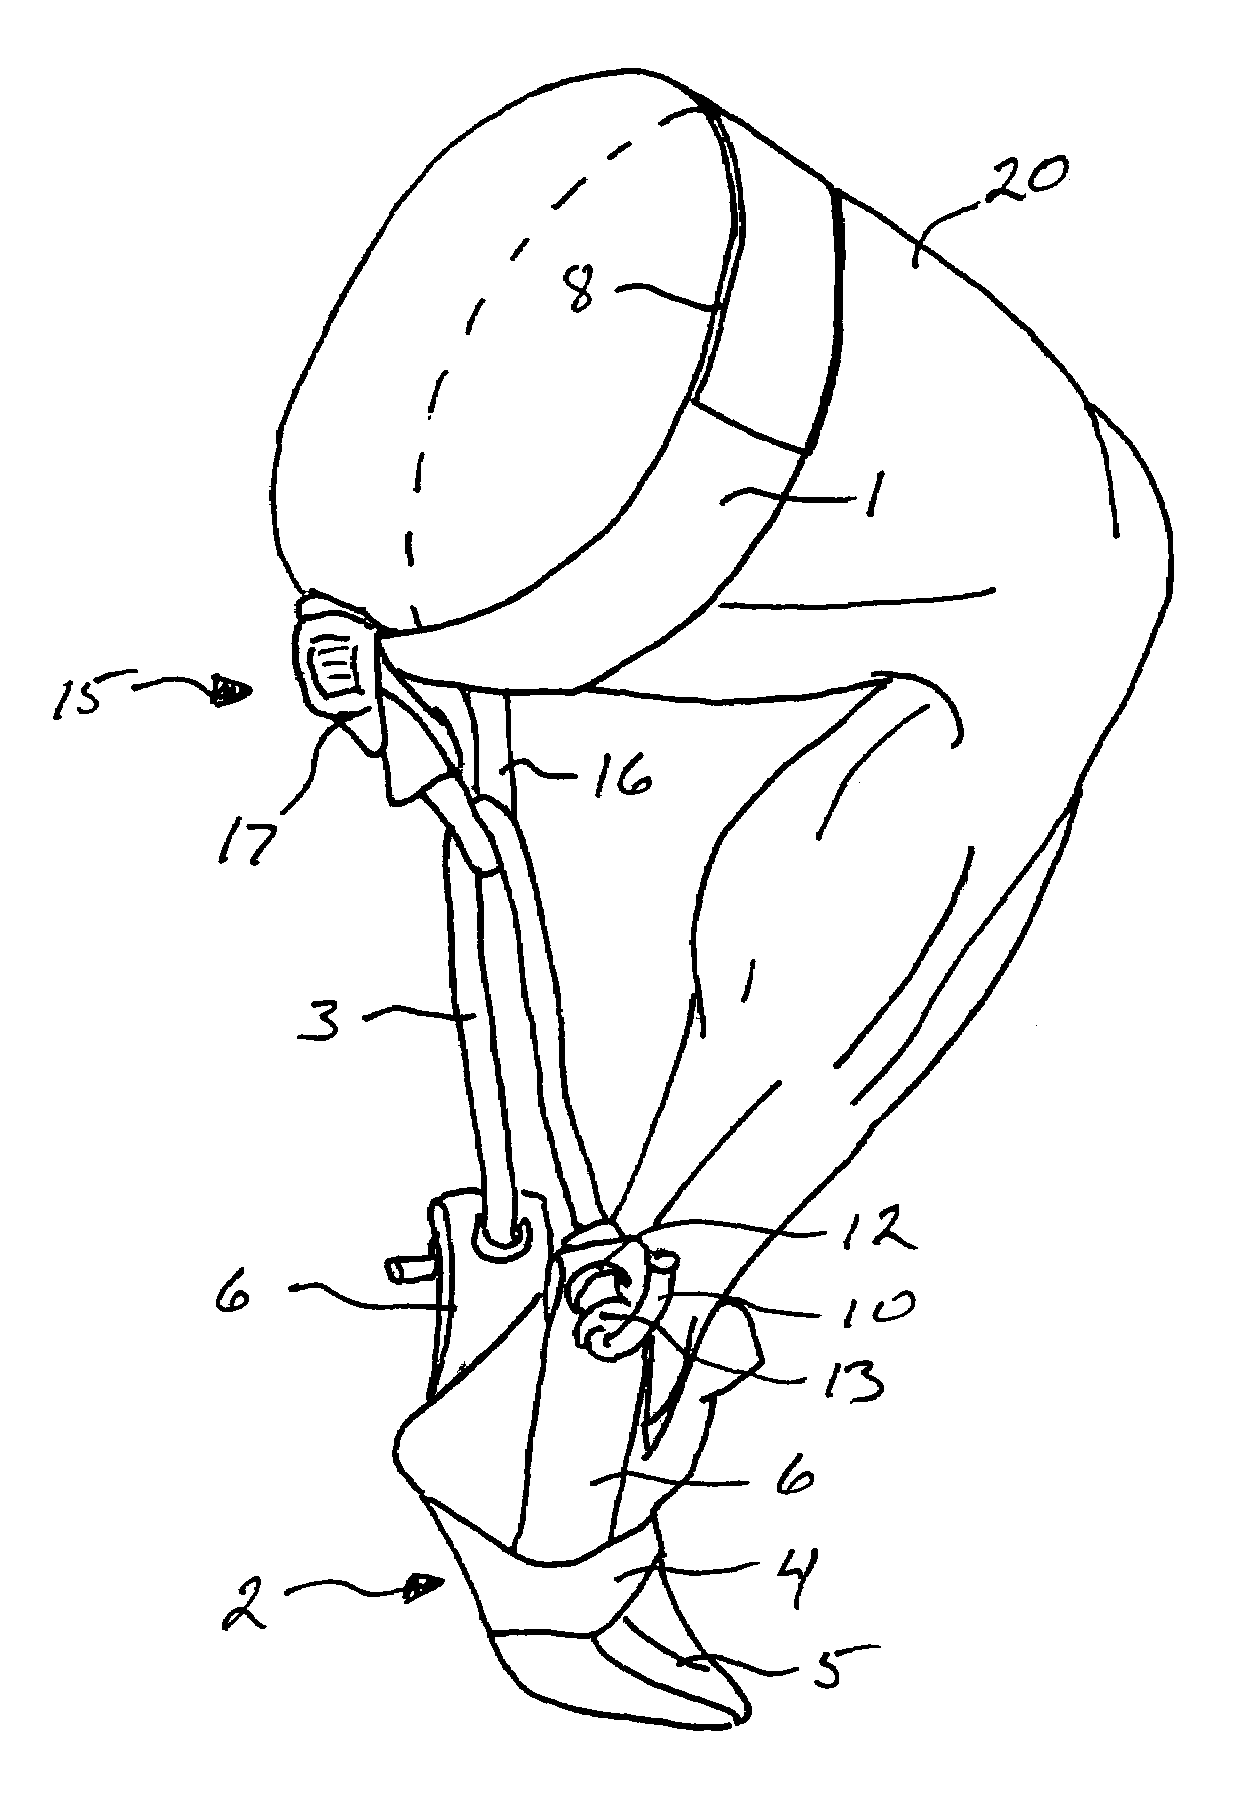 Runner training and exercise device